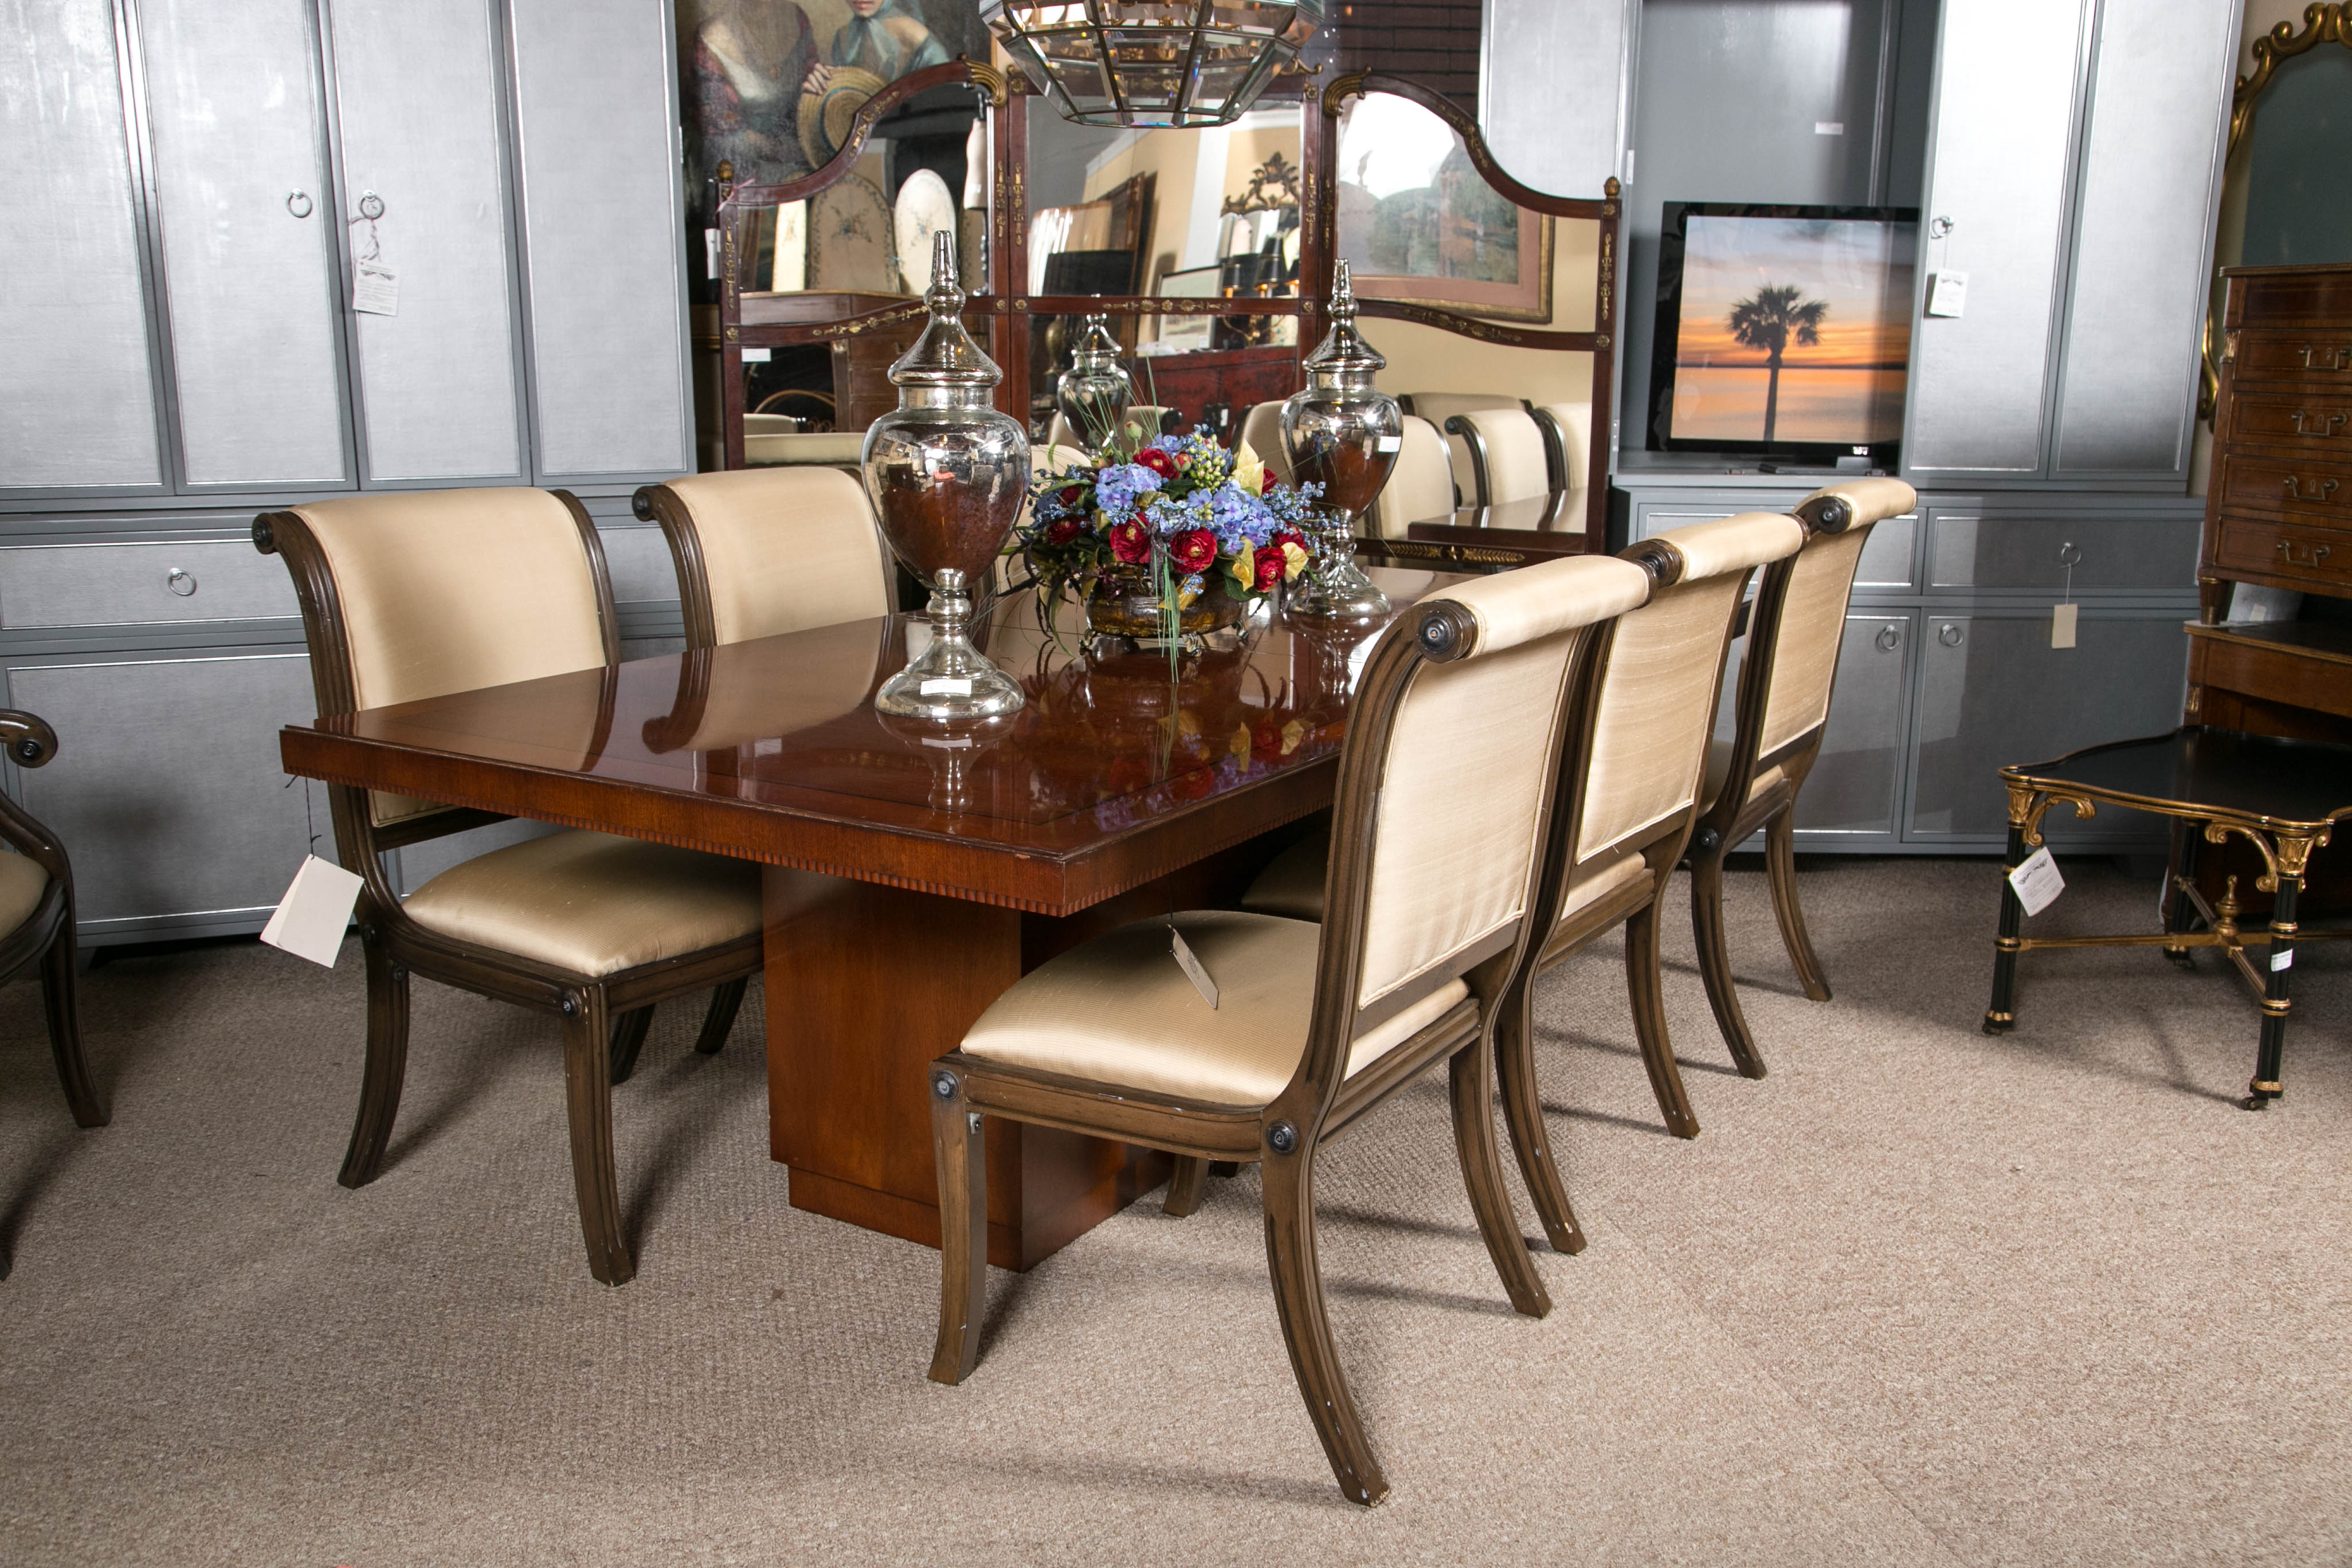 This absolutely stunning dining table is retailed at Bloomingdale's at over $18,000. This fine all solid wood walnut veneer dining tables is inlaid with an ebony border and sits upon a sculptured plinth base. Comes with one leaf that measures 20